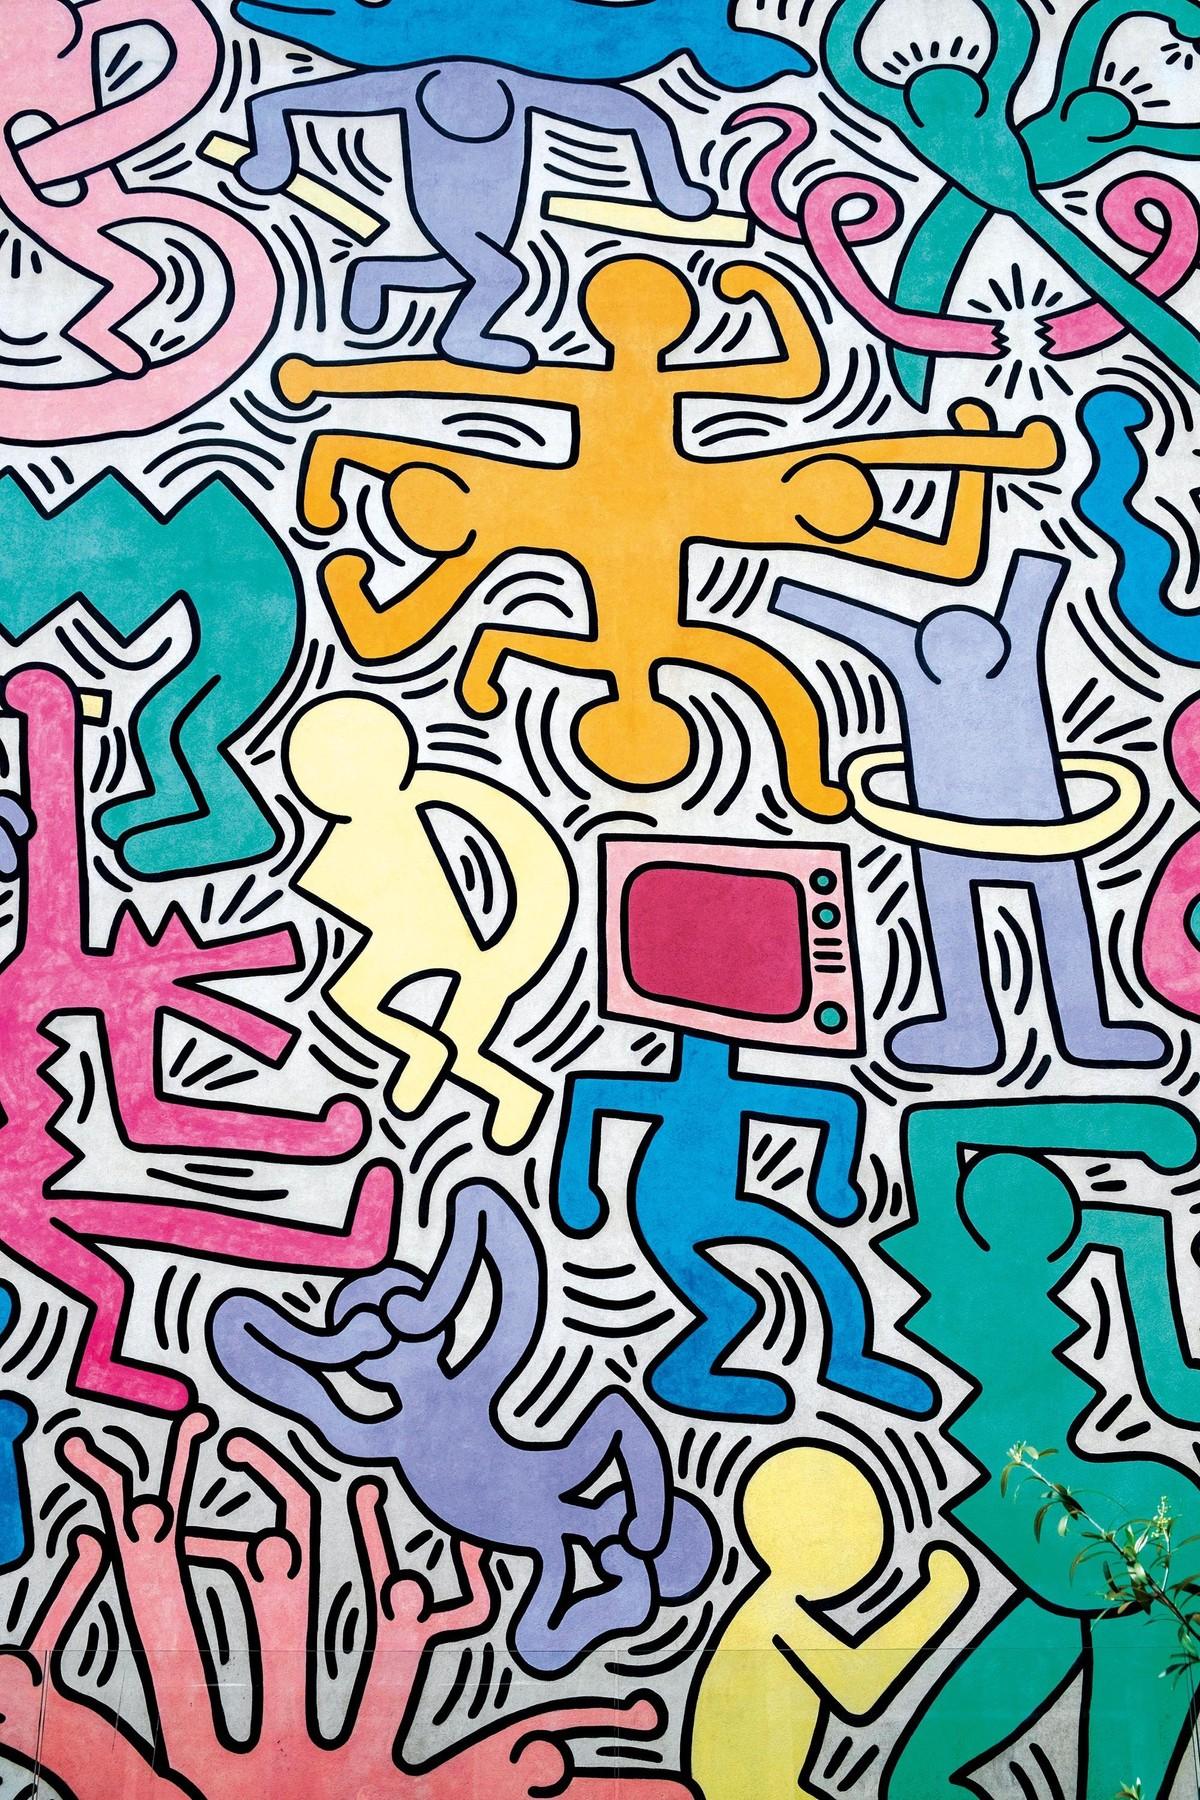  Dessin: We the youth de Keith Haring